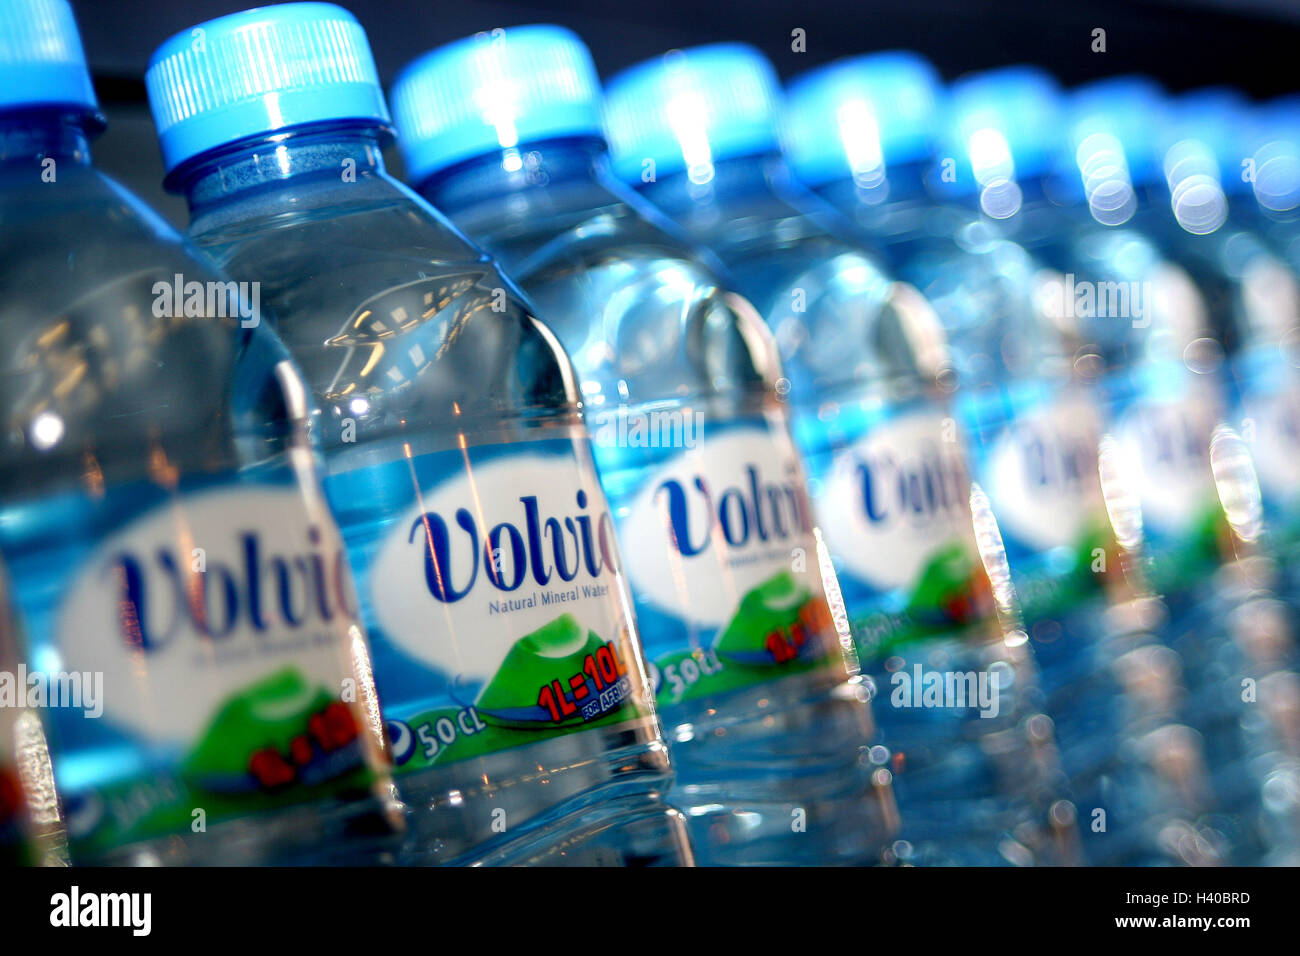 Volvic - Still Water - Sorted Waters